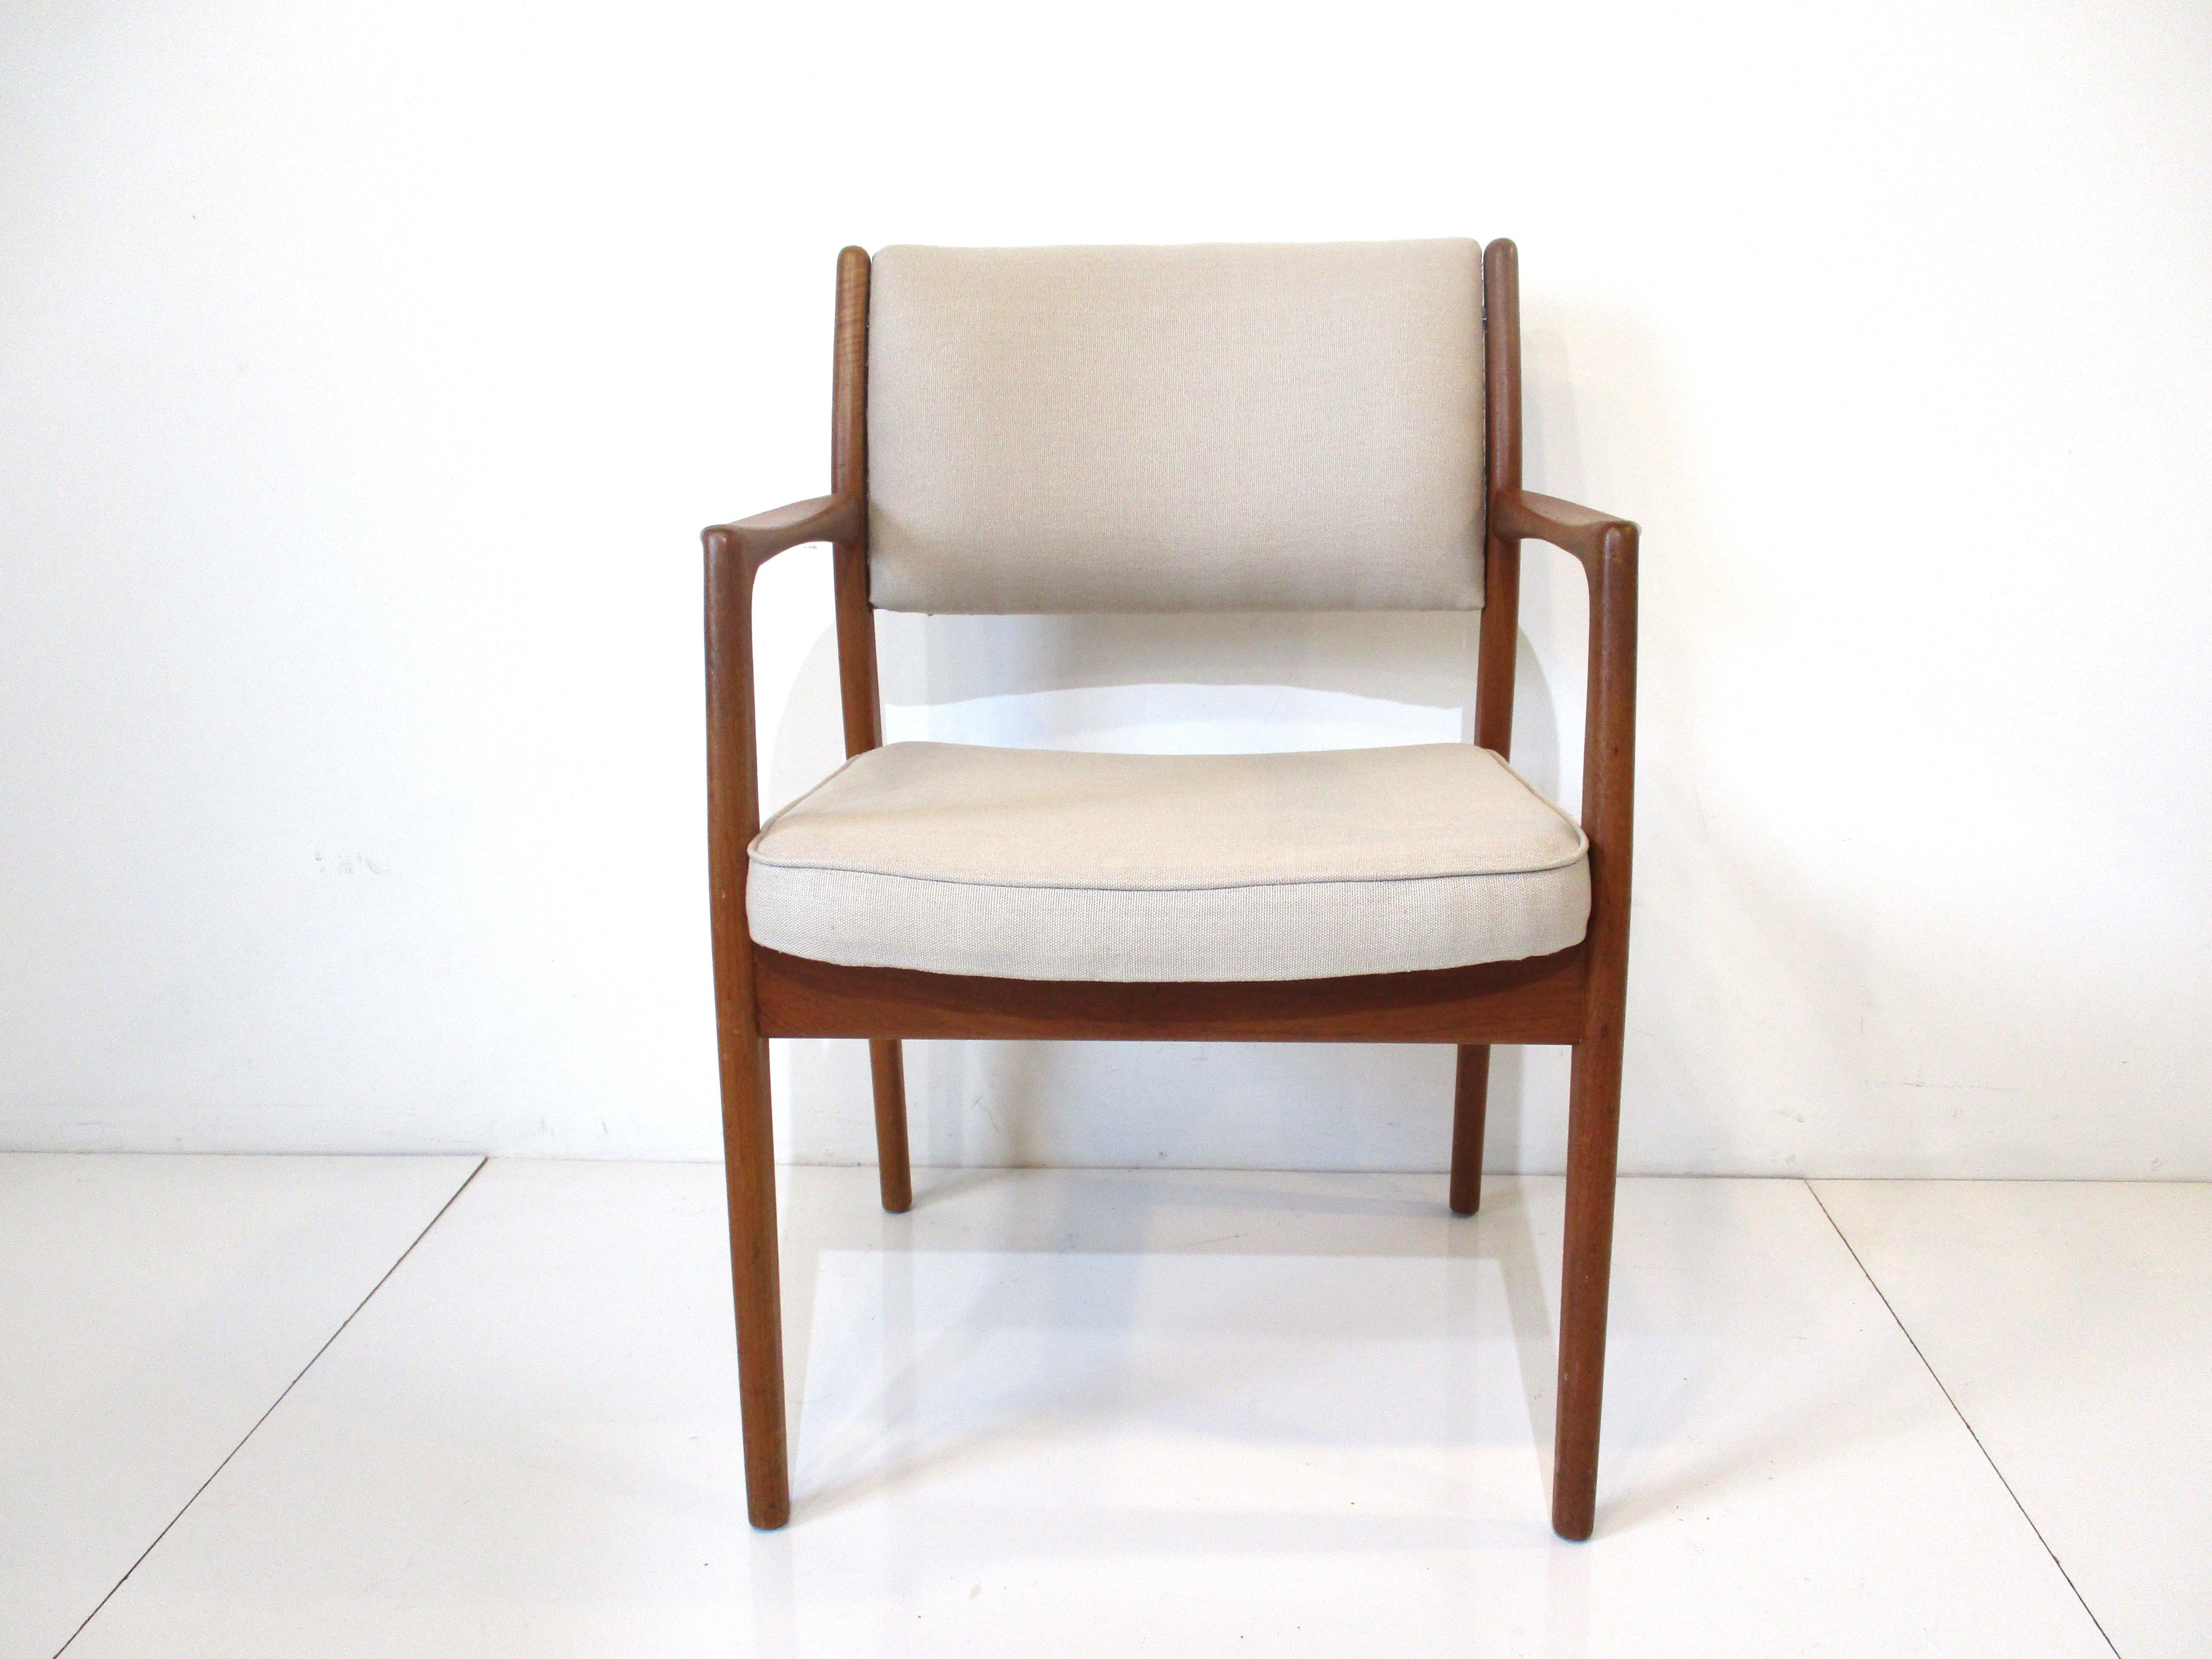 Mid-Century Modern Teak Occasional Chair by Dux / Ekselius, Ohlsson Sweden For Sale